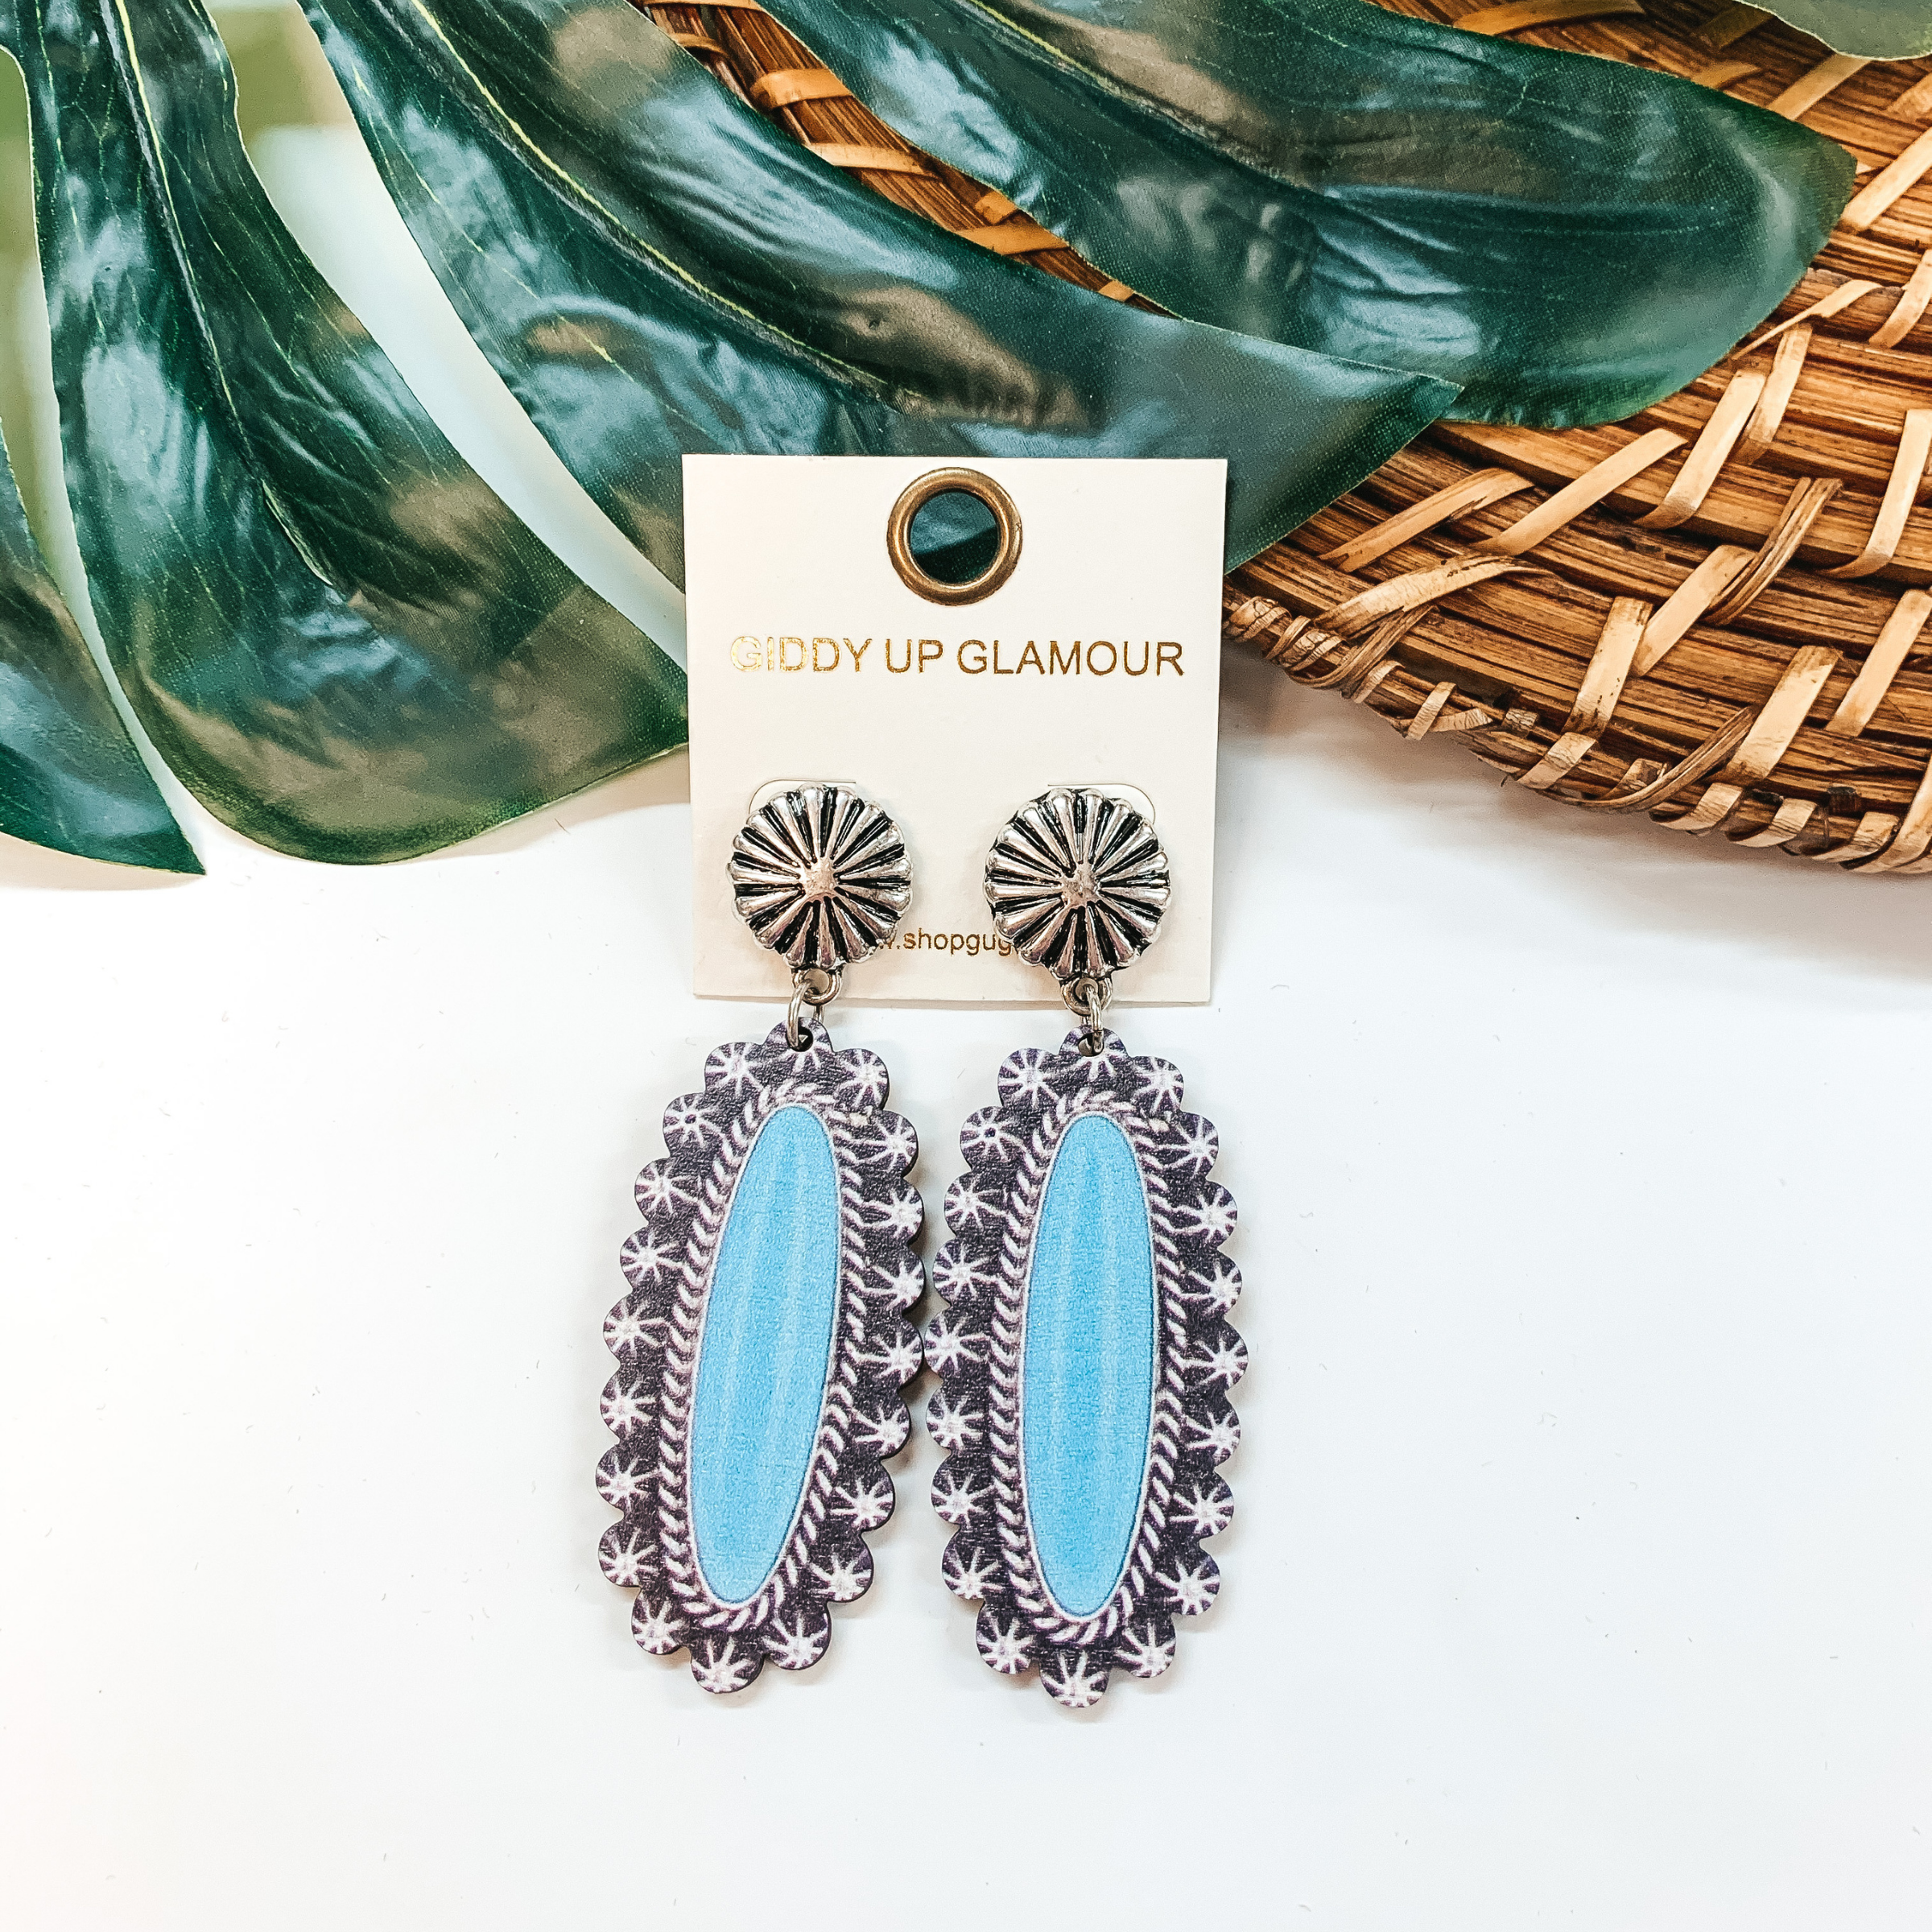 Western Oval Wood Post Earrings in Turquoise - Giddy Up Glamour Boutique